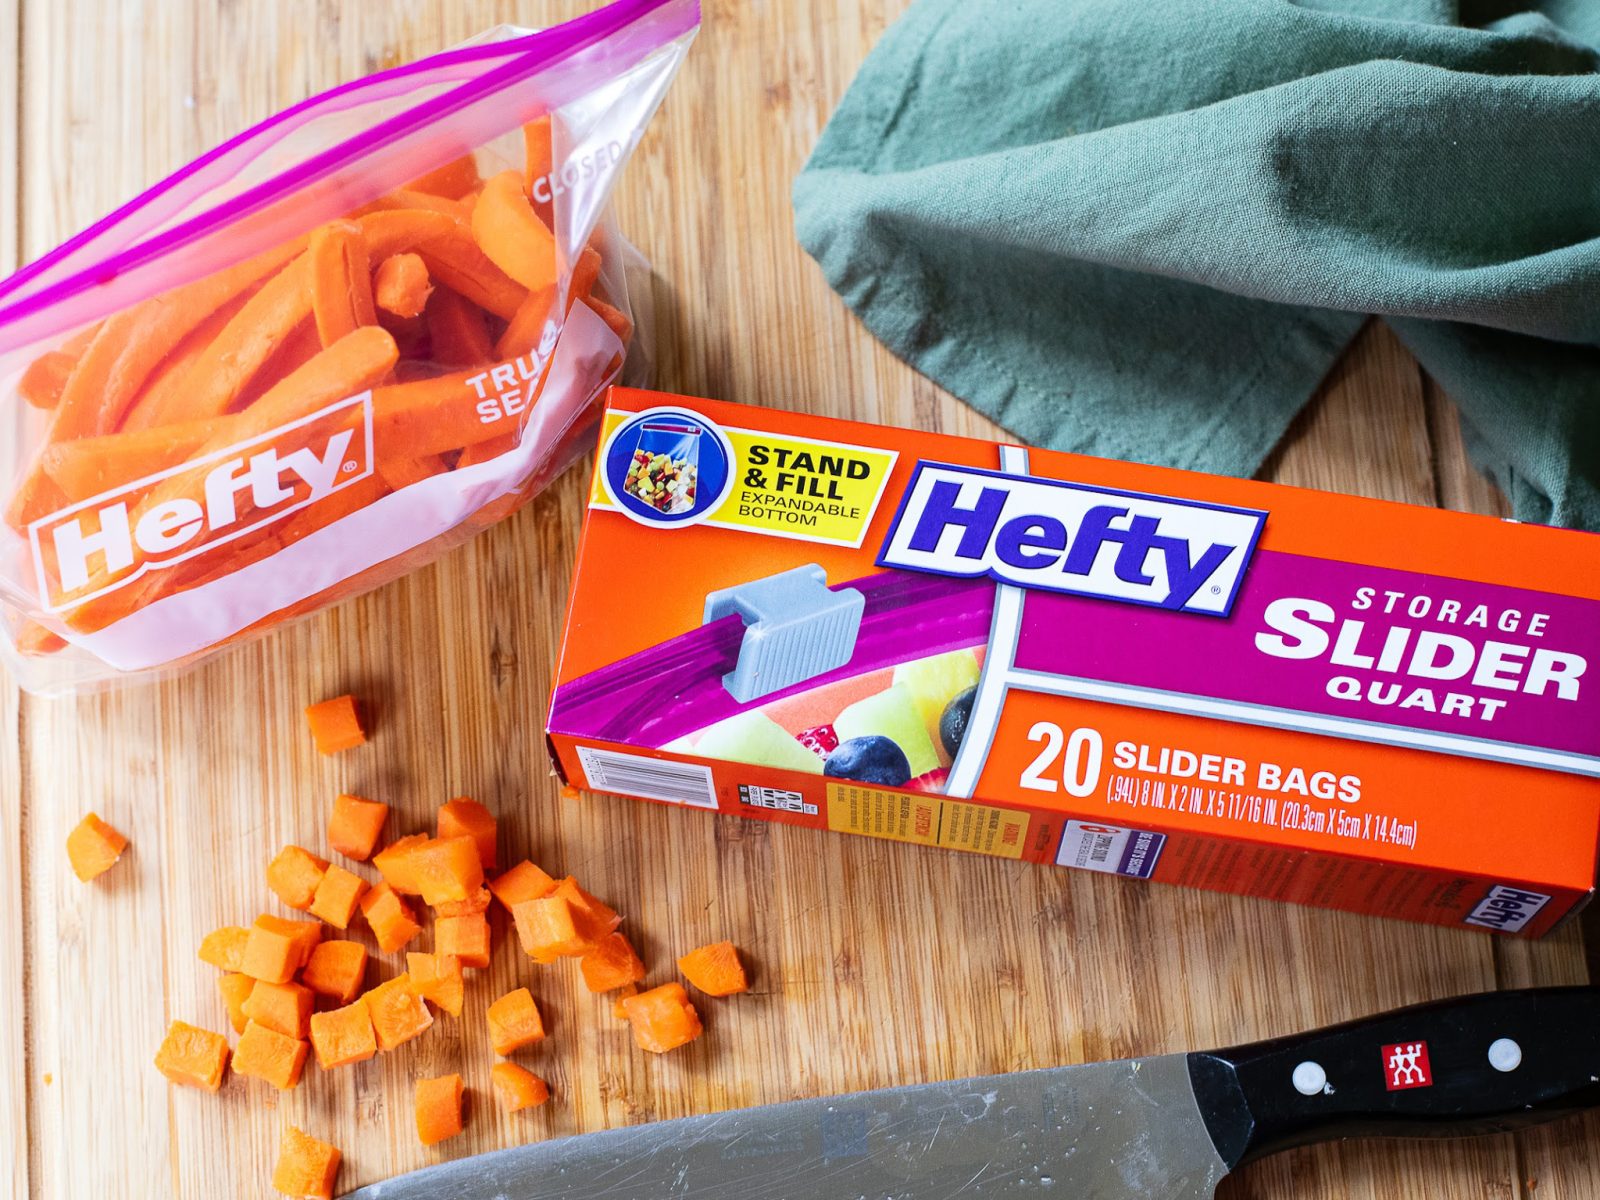 Hefty® Slider Bags Are Perfect For Holiday Food Prep & Storage – Save $2  NOW At Publix - iHeartPublix